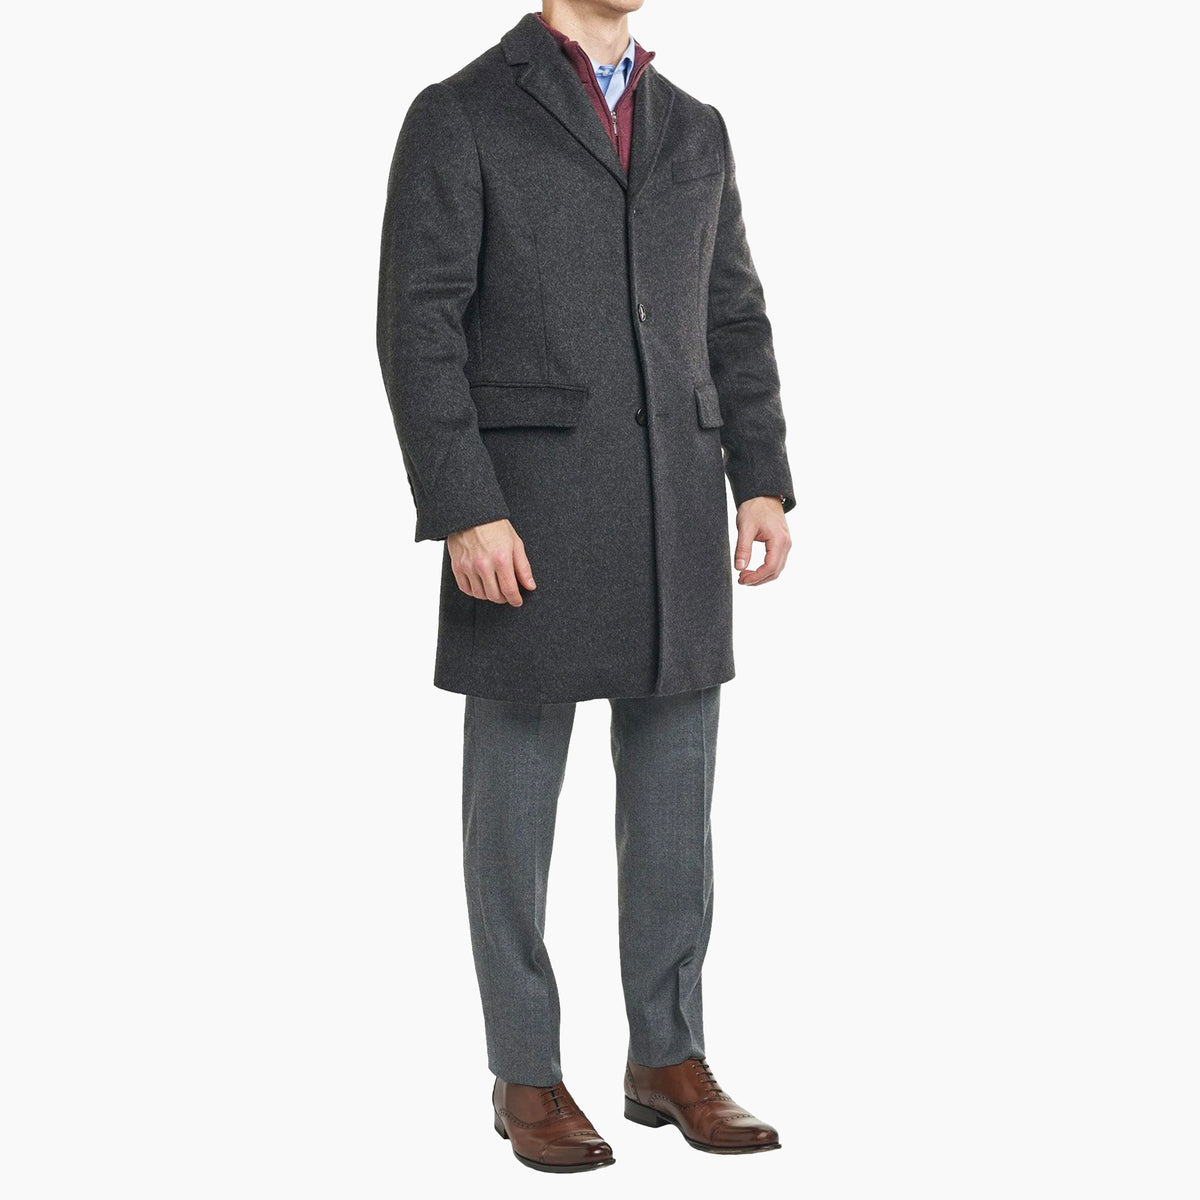 Fulton Wool Cashmere Topcoat, Charcoal | Peter Manning NYC